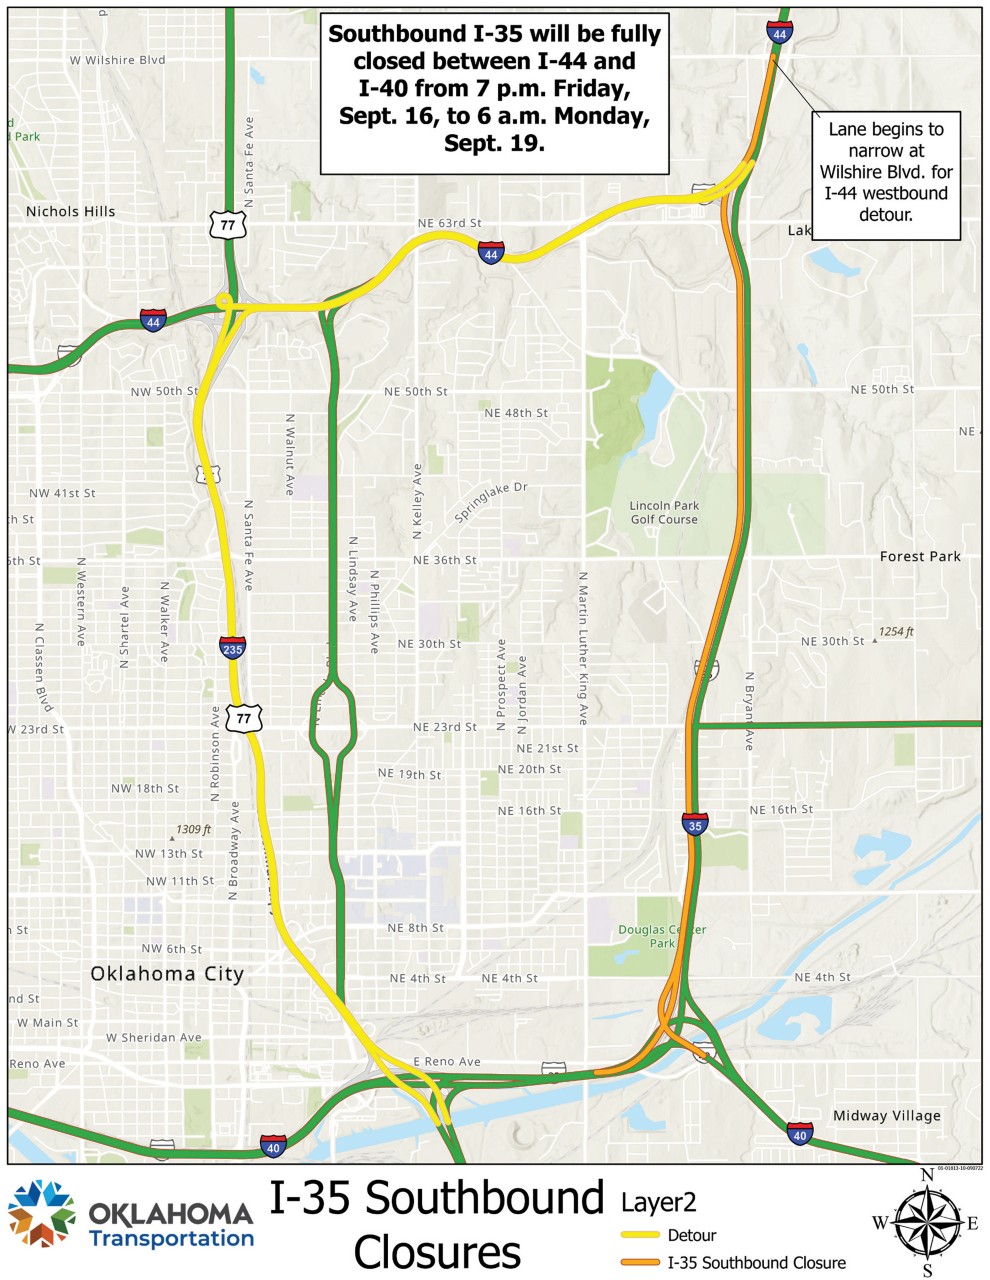 Southbound I-35 will be closed between I-44 and I-40 from 7 p.m. Sept. 16 to 6 a.m. Sept. 19 as part of a resurfacing project.